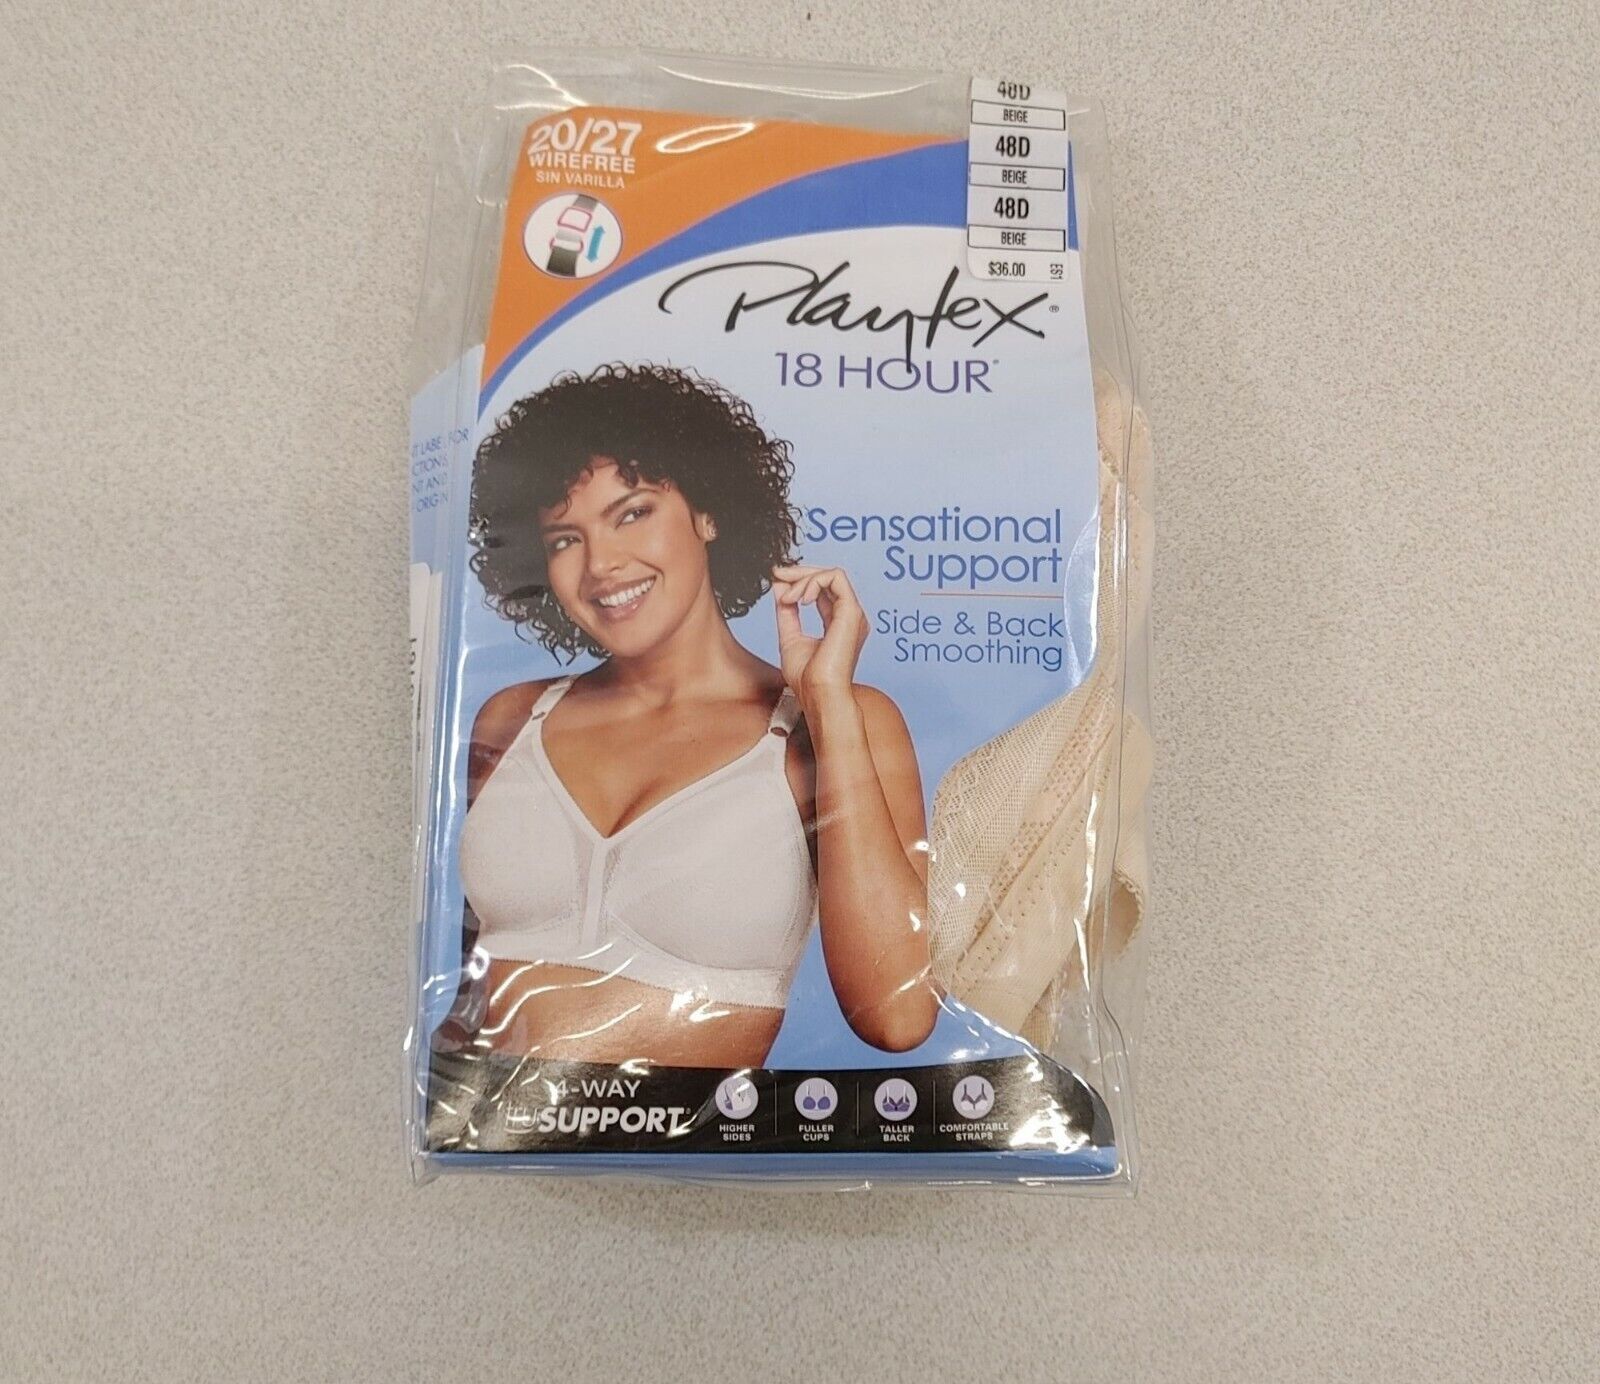 Primary image for Playtex 18 Hour Full Cup Sensational Support Bra Women's Size 48D Beige Wirefree